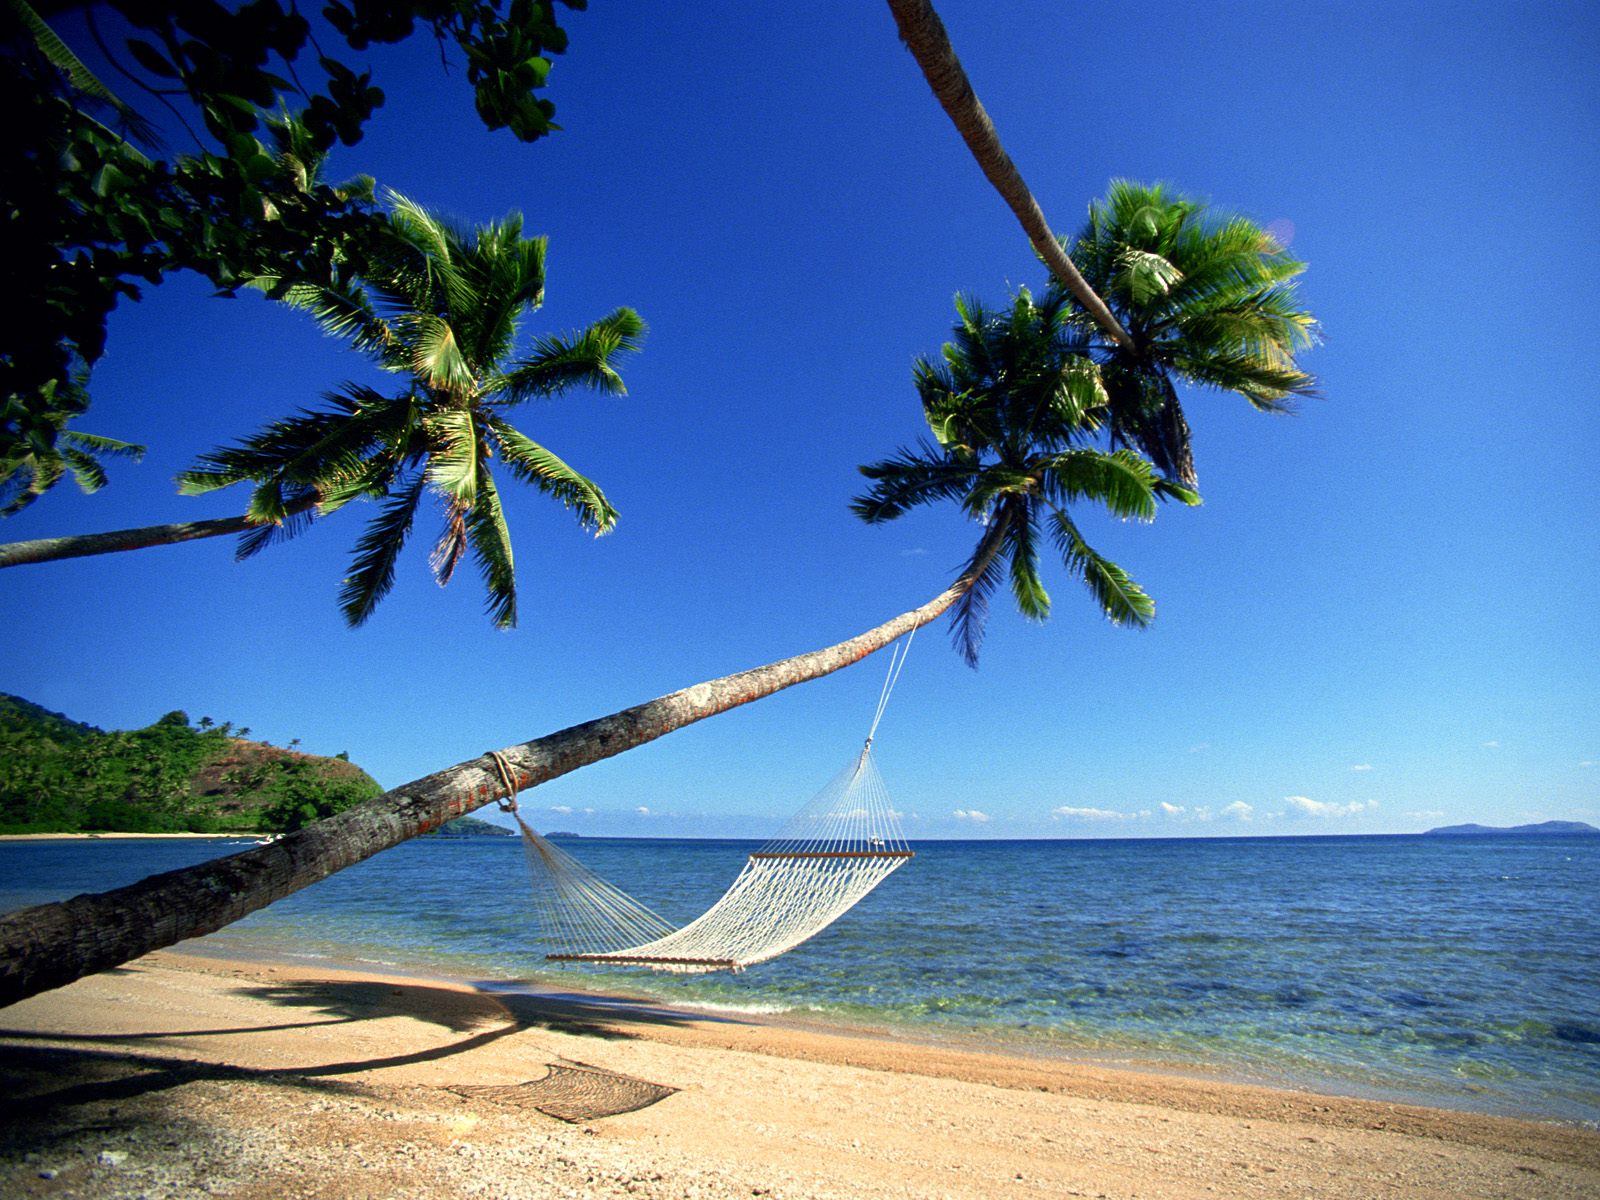 Tropical paradise with palm tree, hammock, and ocean view.